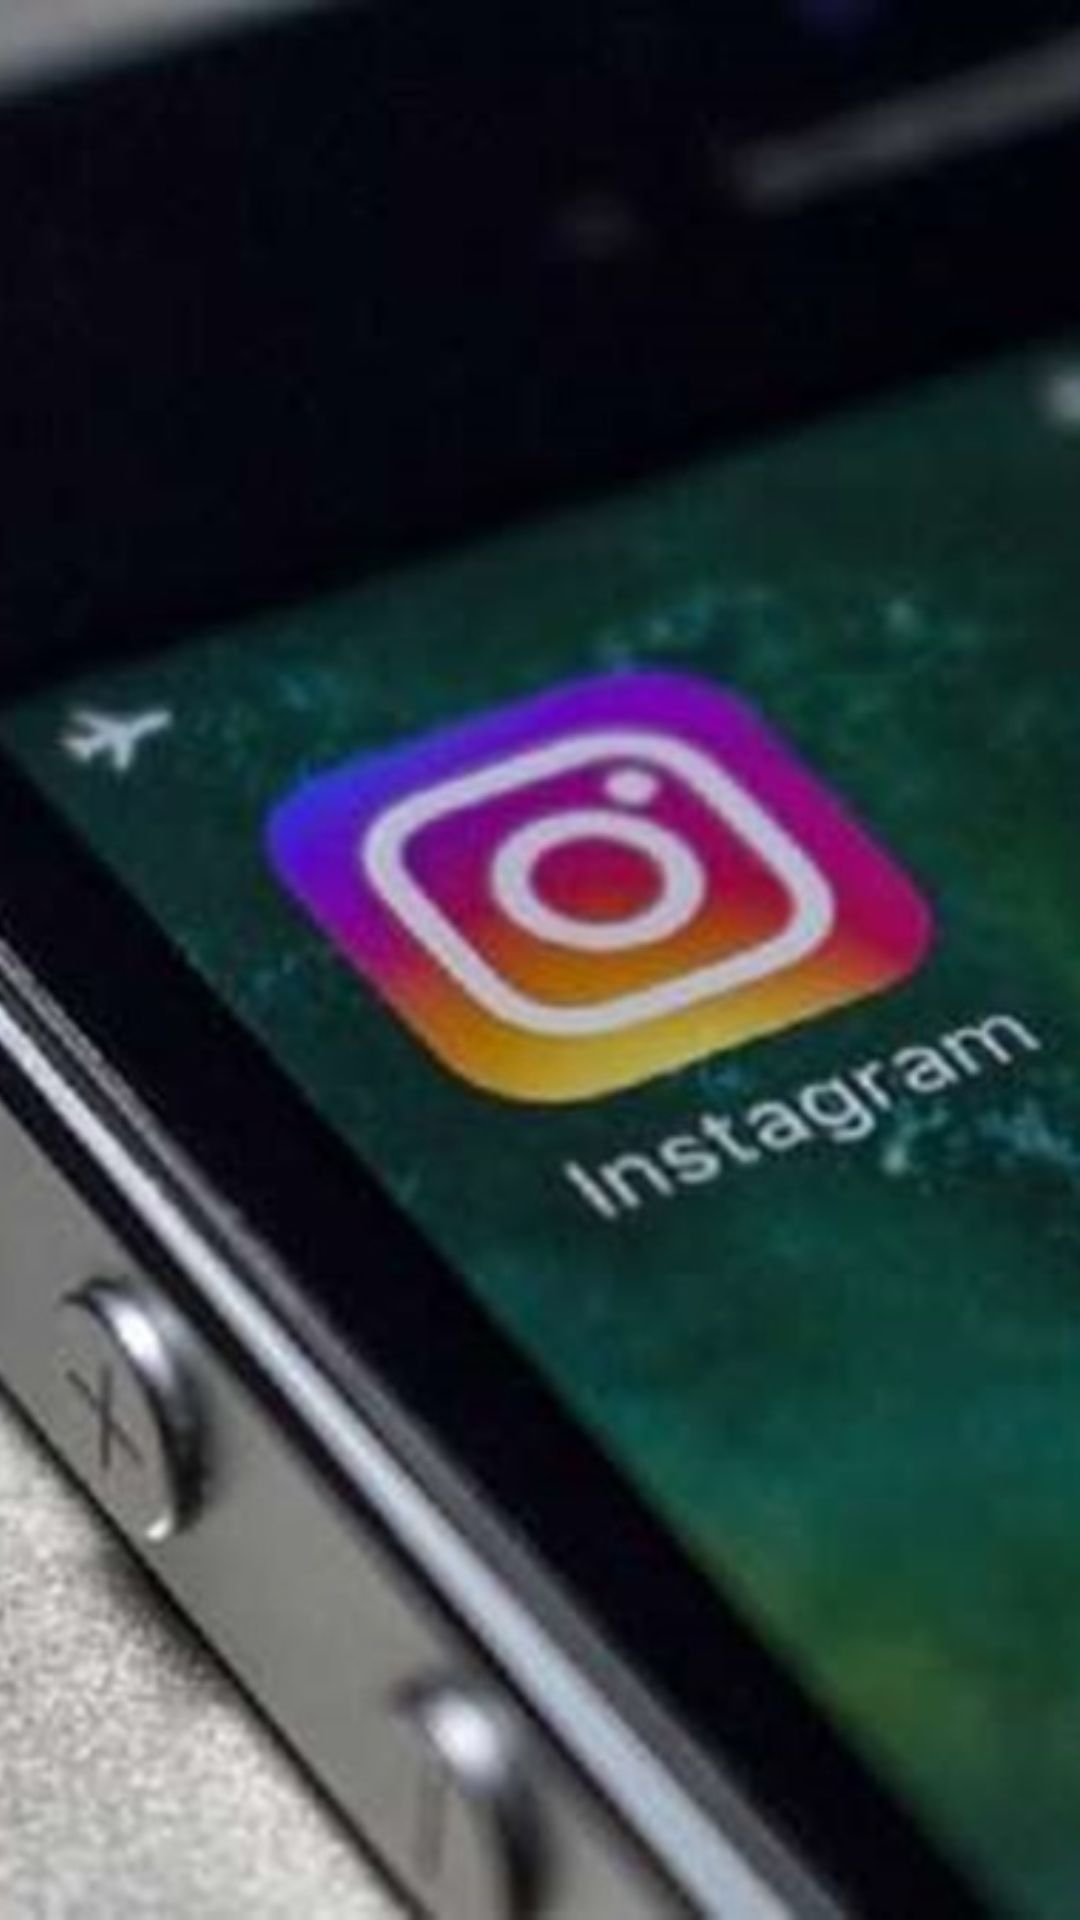 Worried about Instagram tracking your online activity? Here's how to block it
